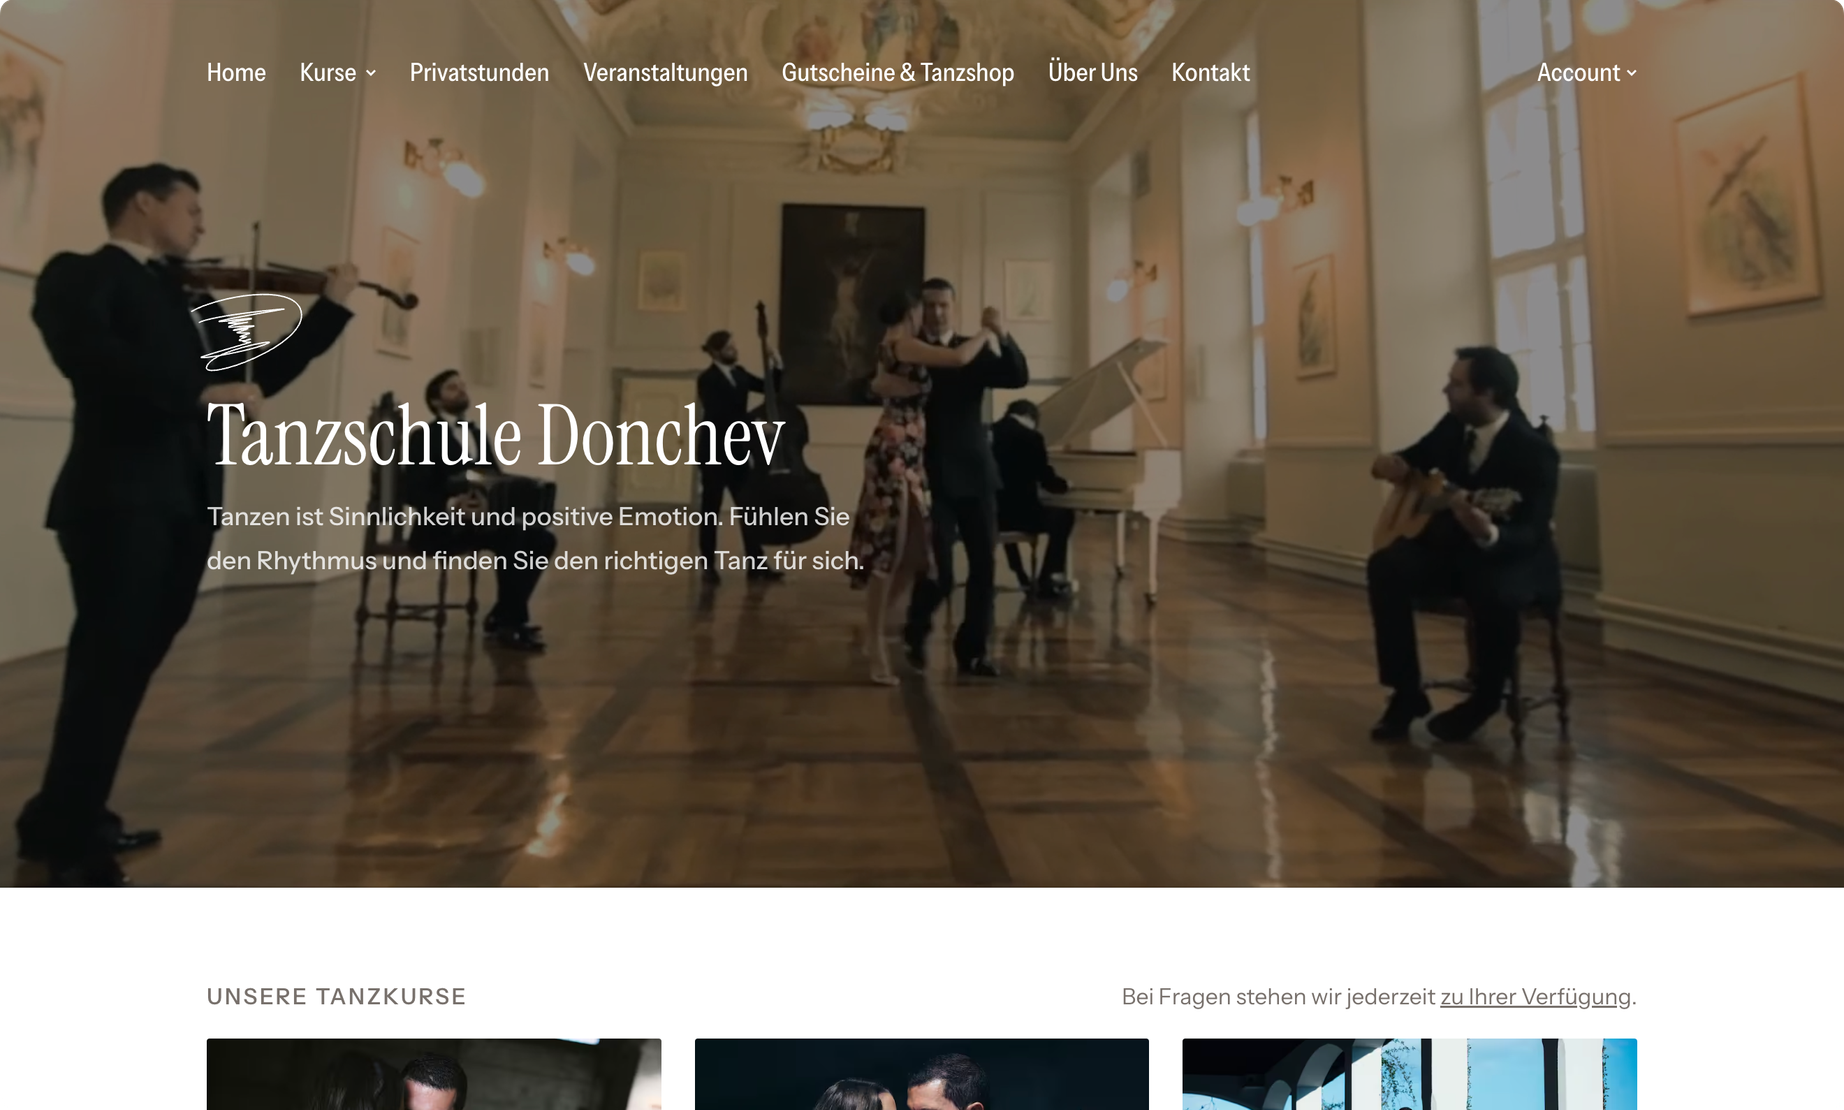 Preview of Tanzschule Donchev's website.